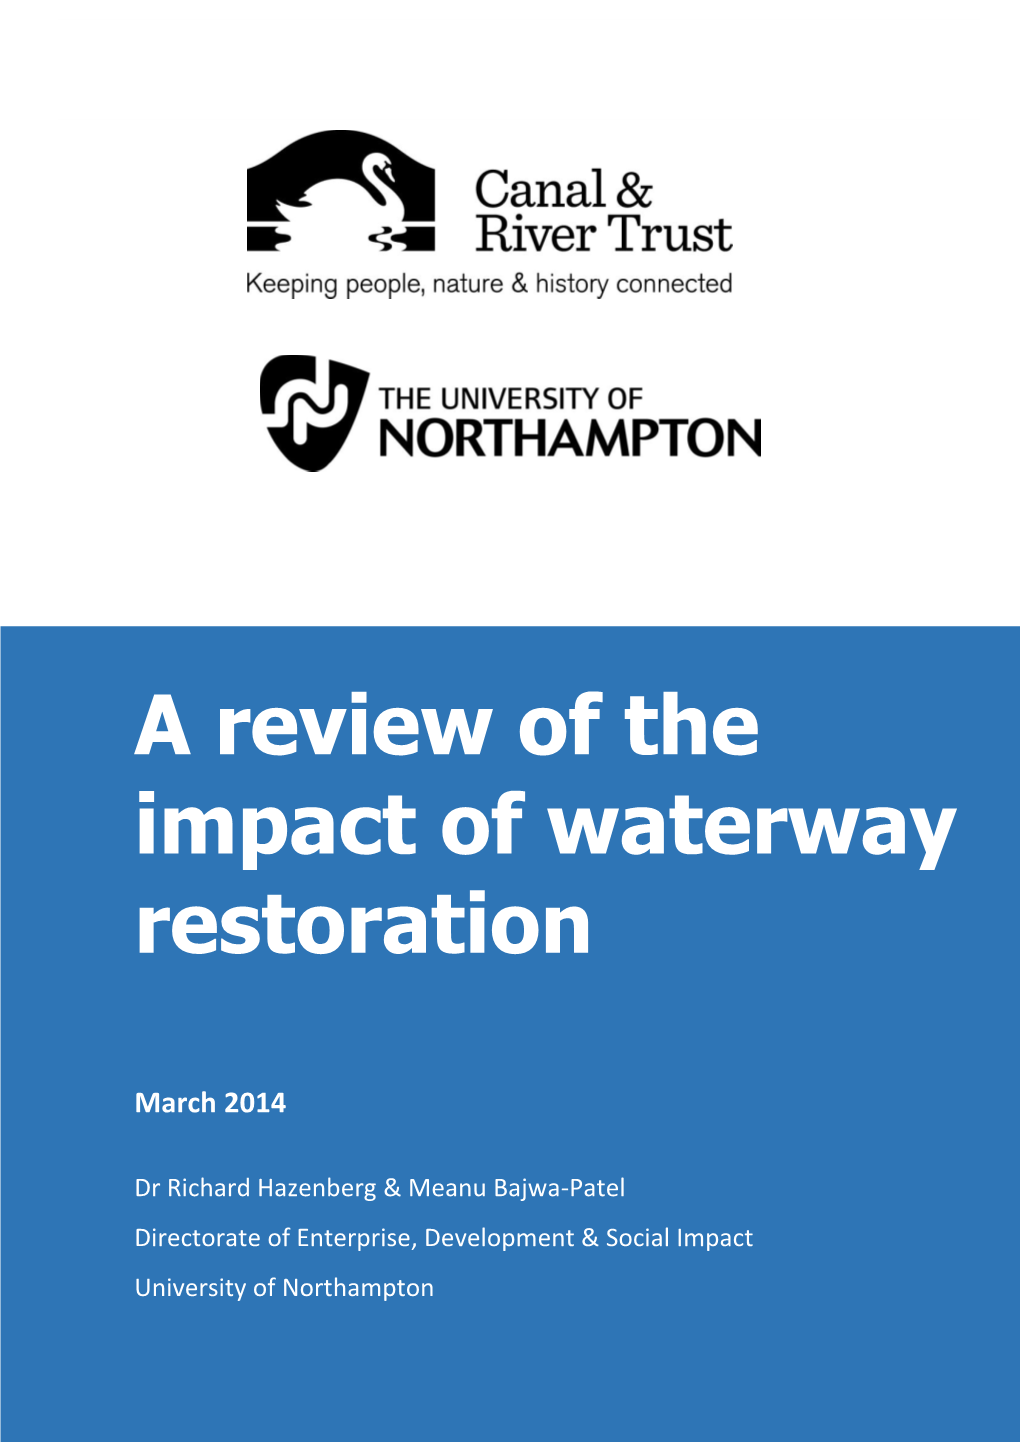 A Review of the Impact of Waterway Restoration